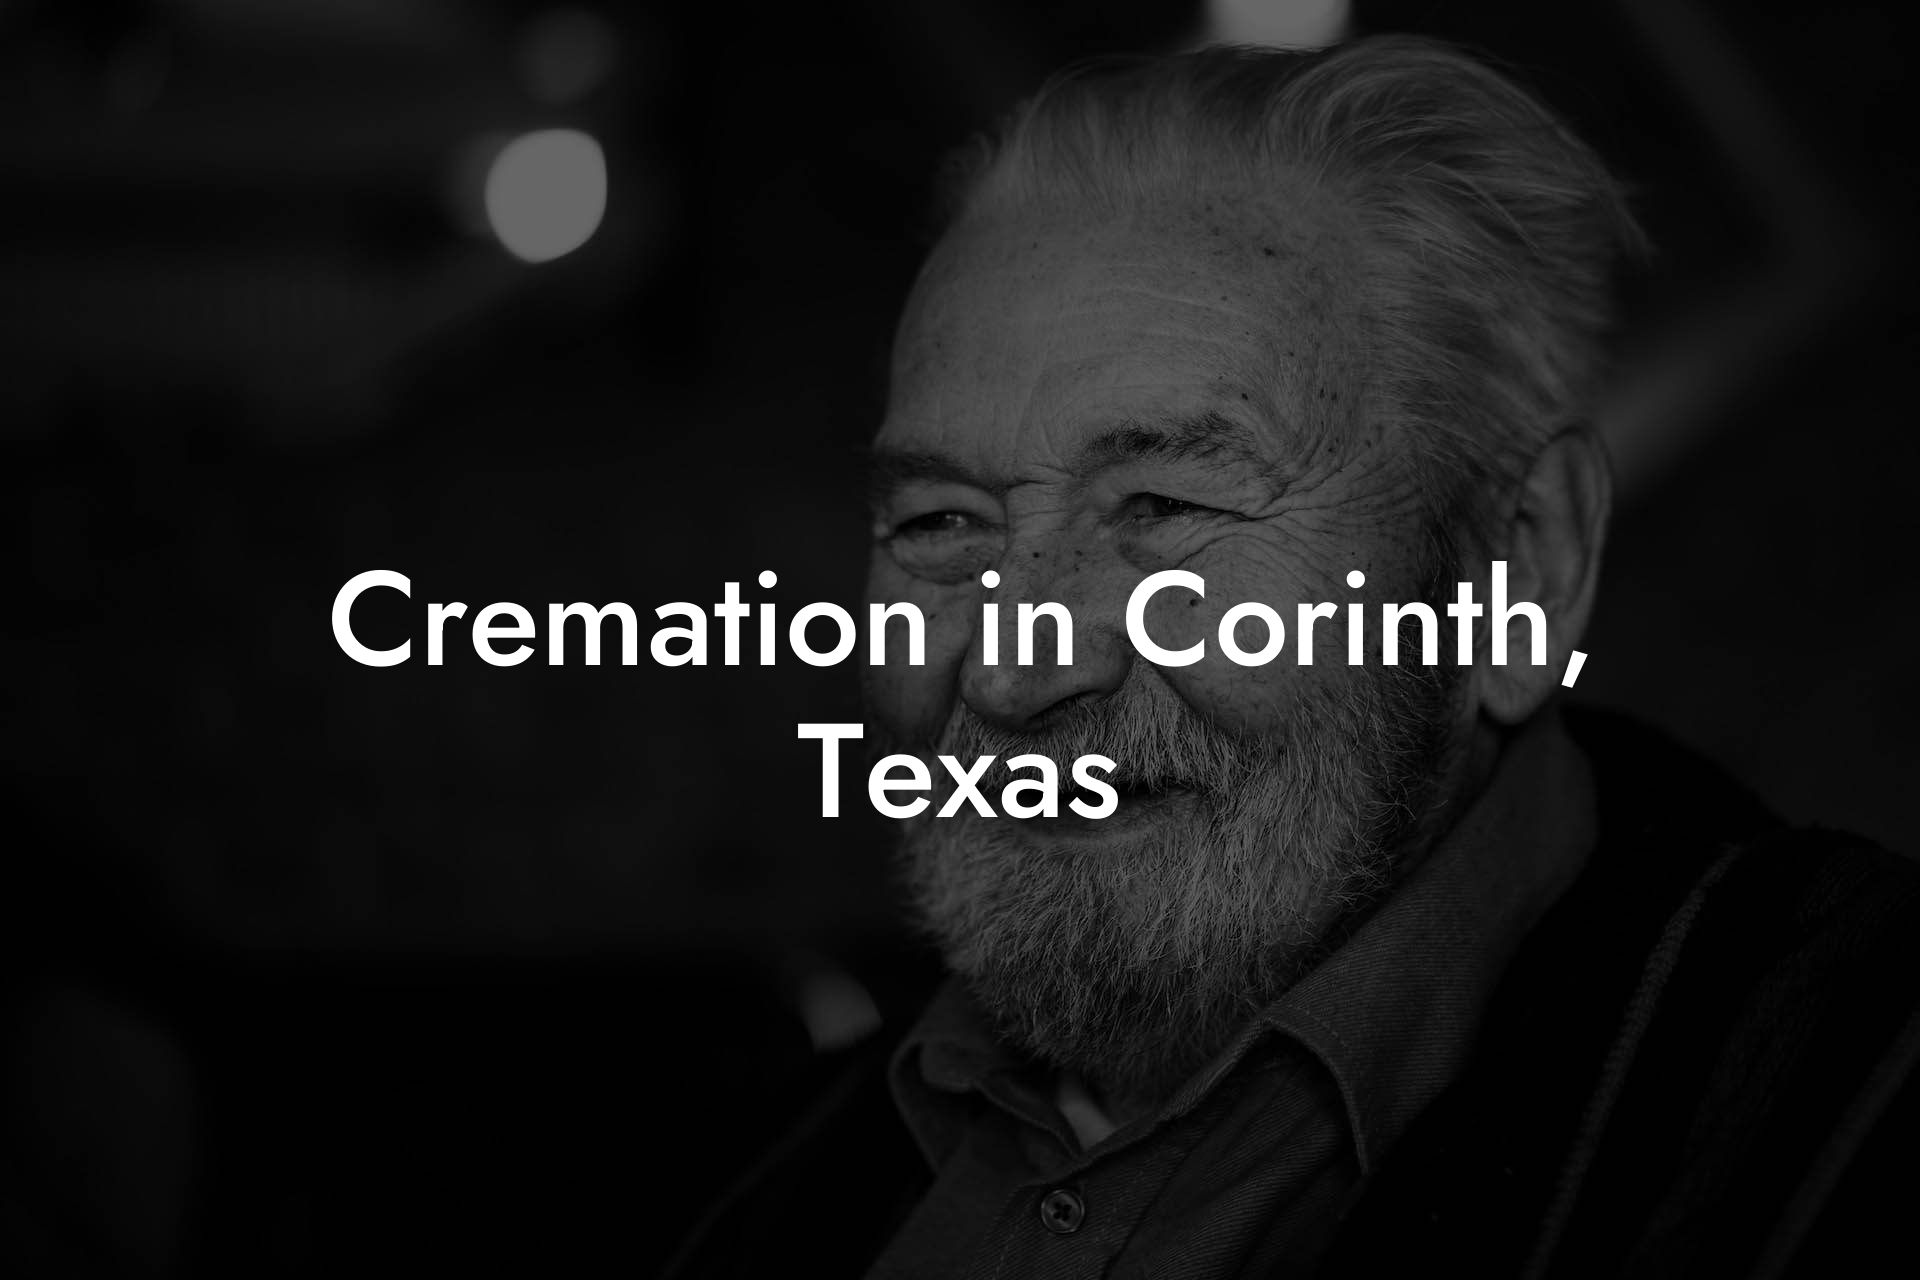 Cremation in Corinth, Texas